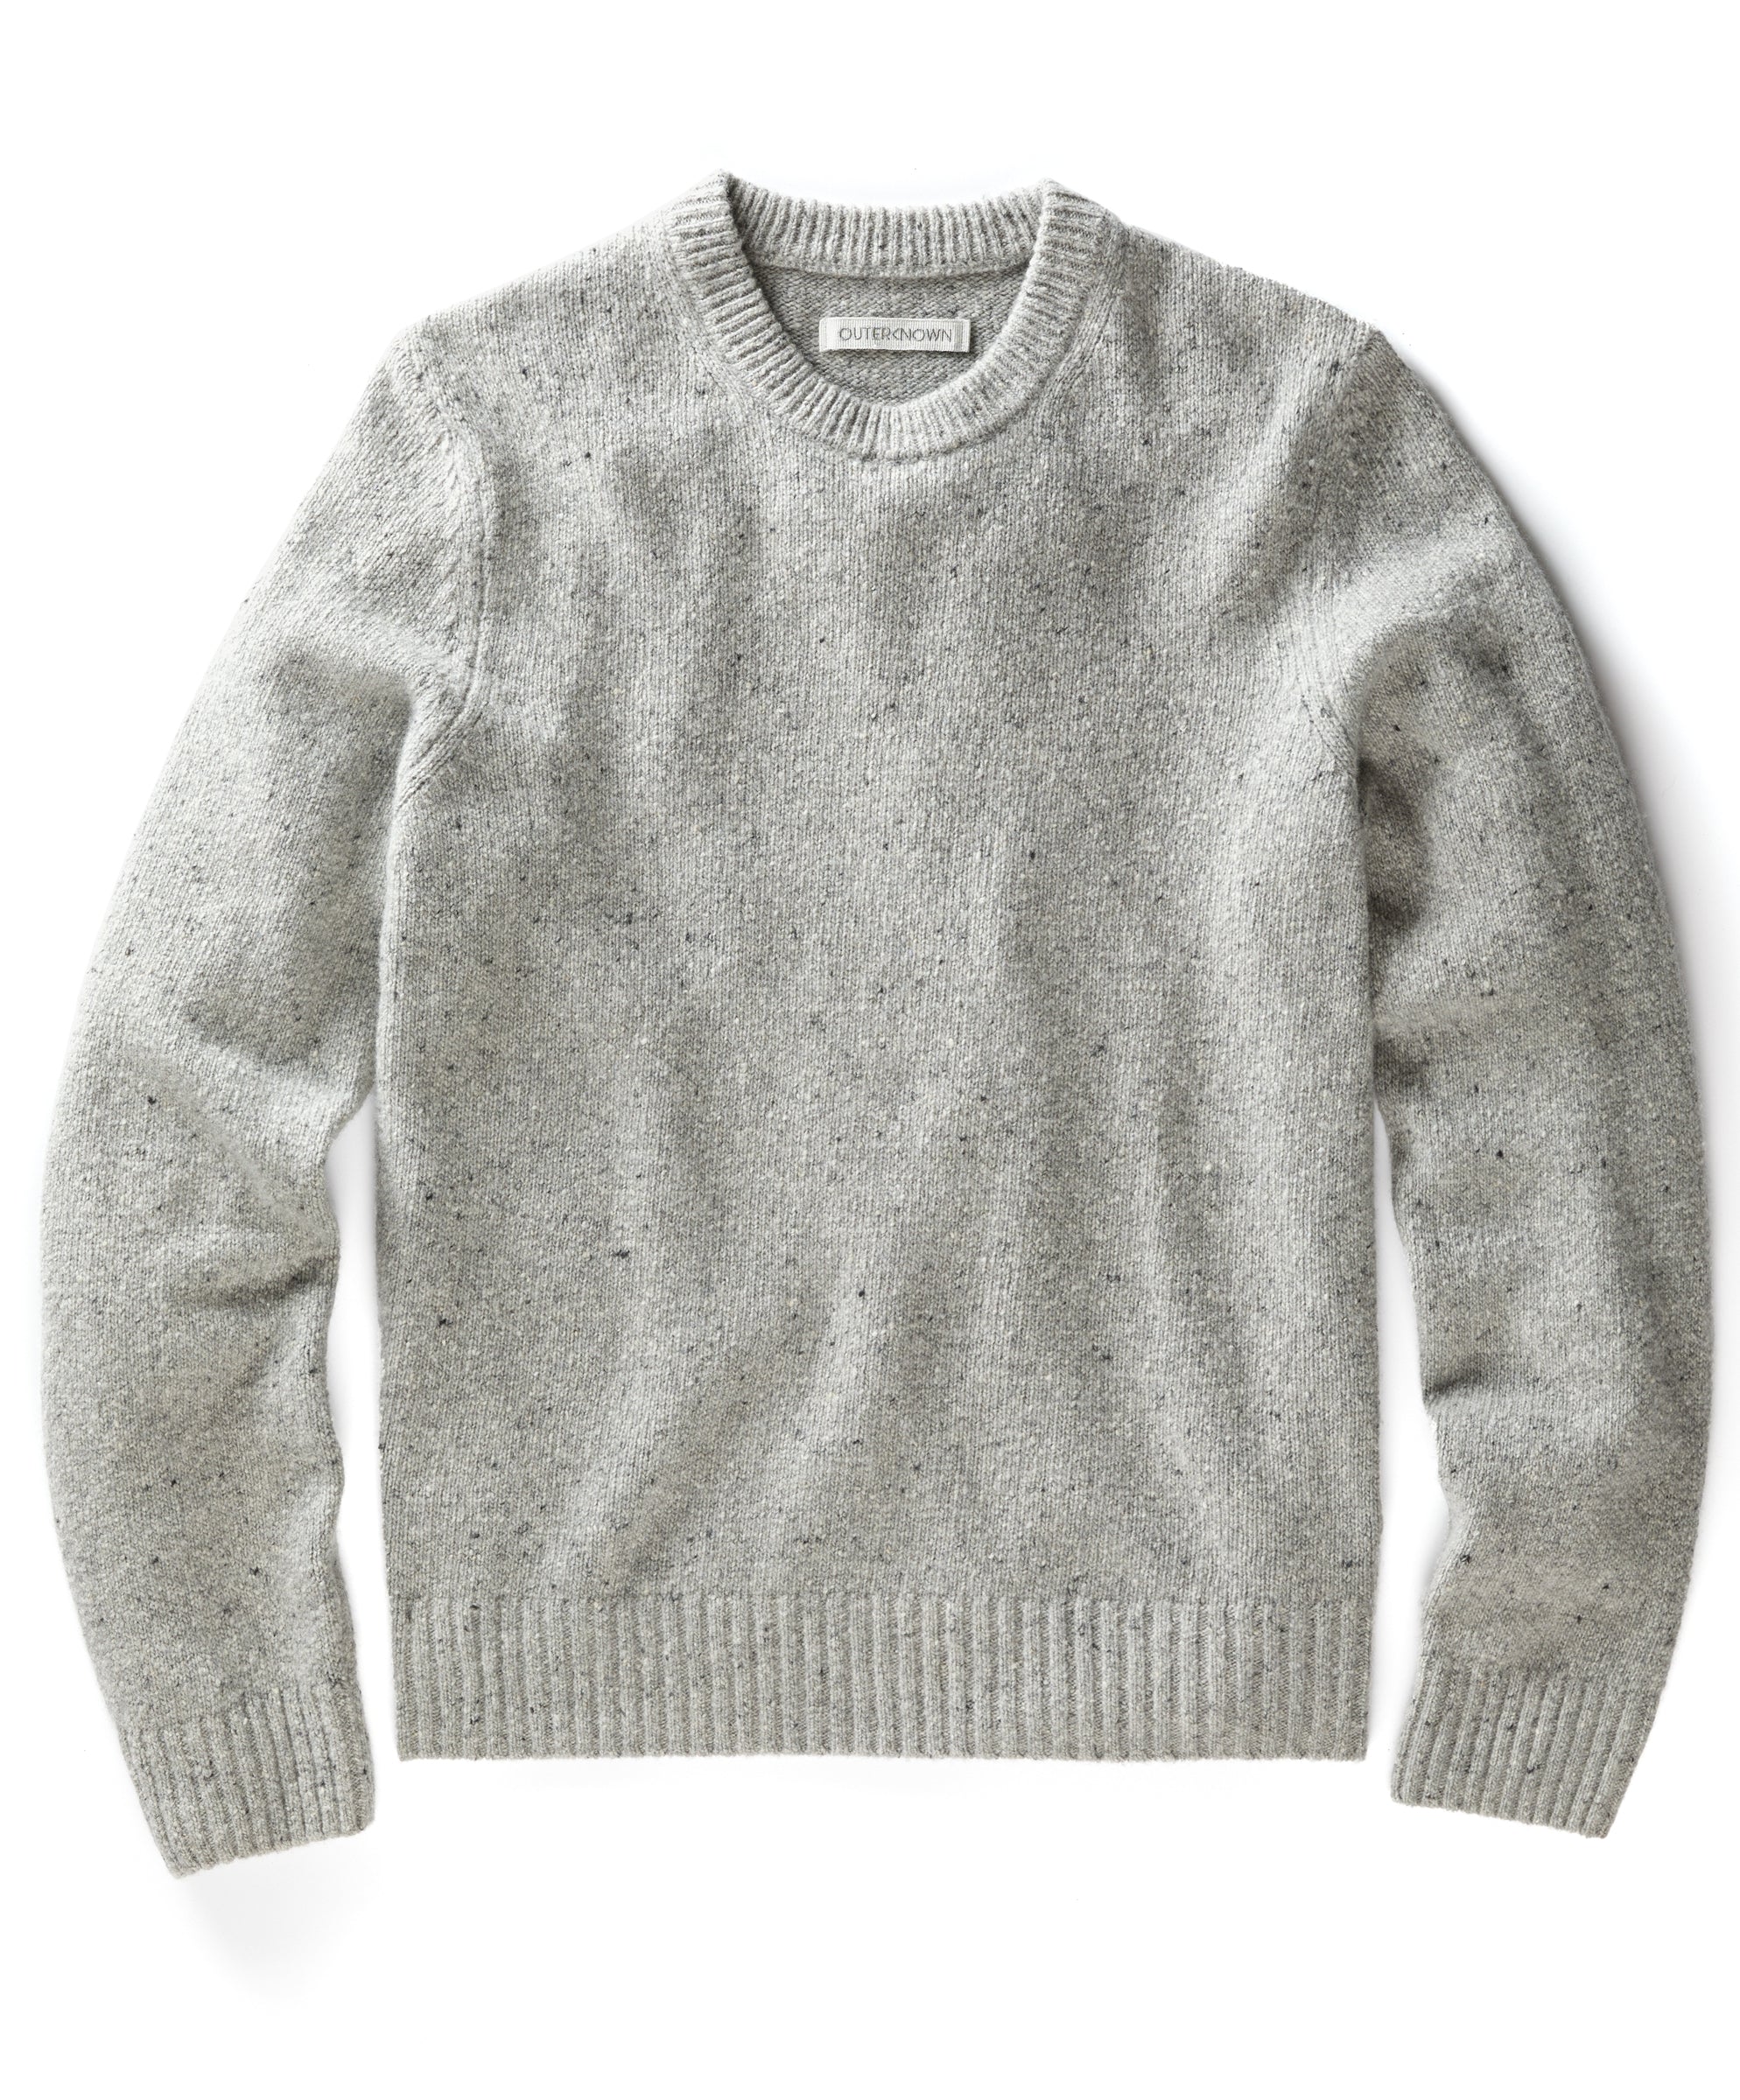 Tomales Donegal Crew | Men's Sweaters | Outerknown